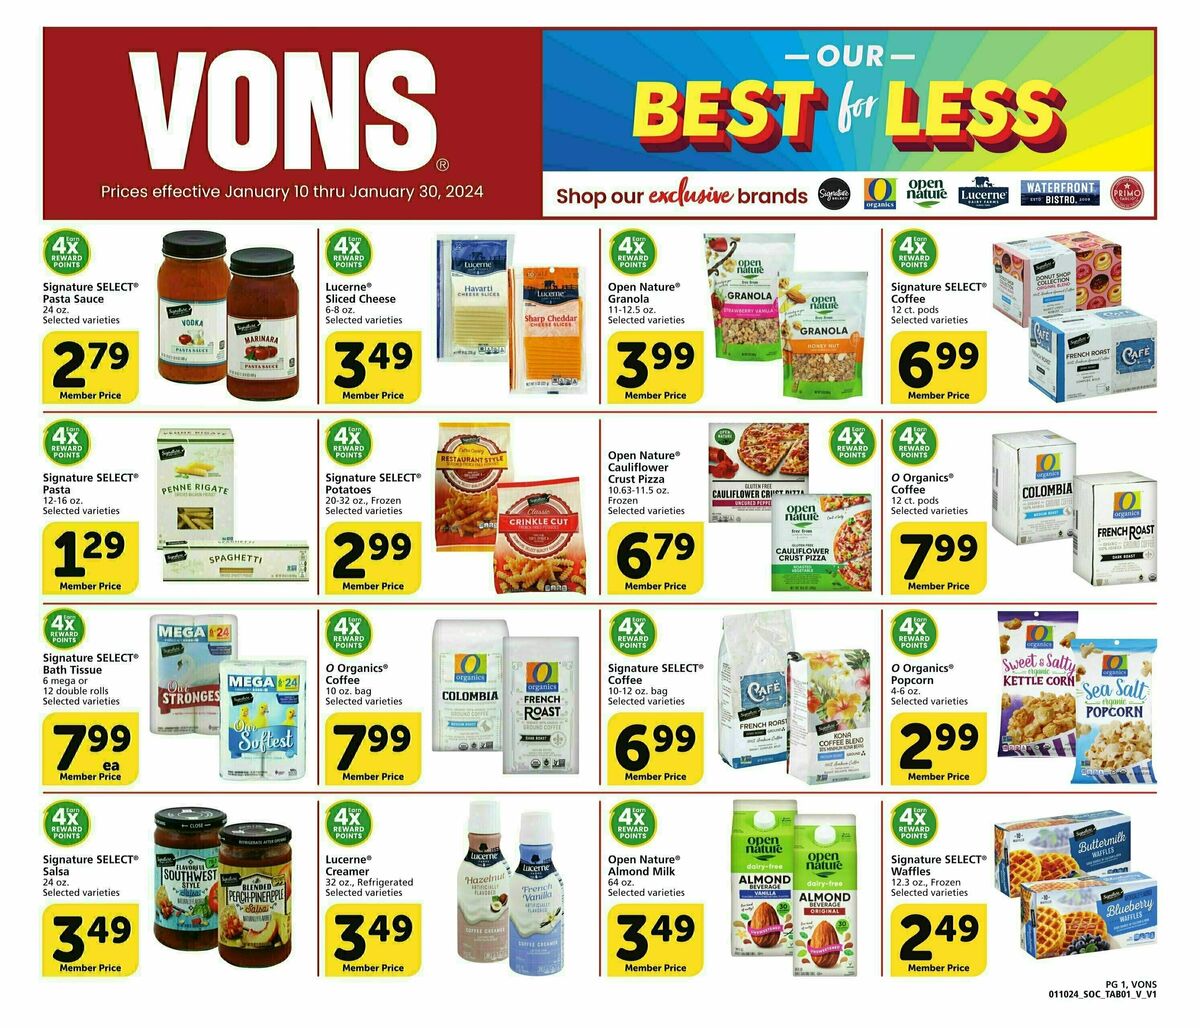 Vons Big Book of Savings Weekly Ad from January 10